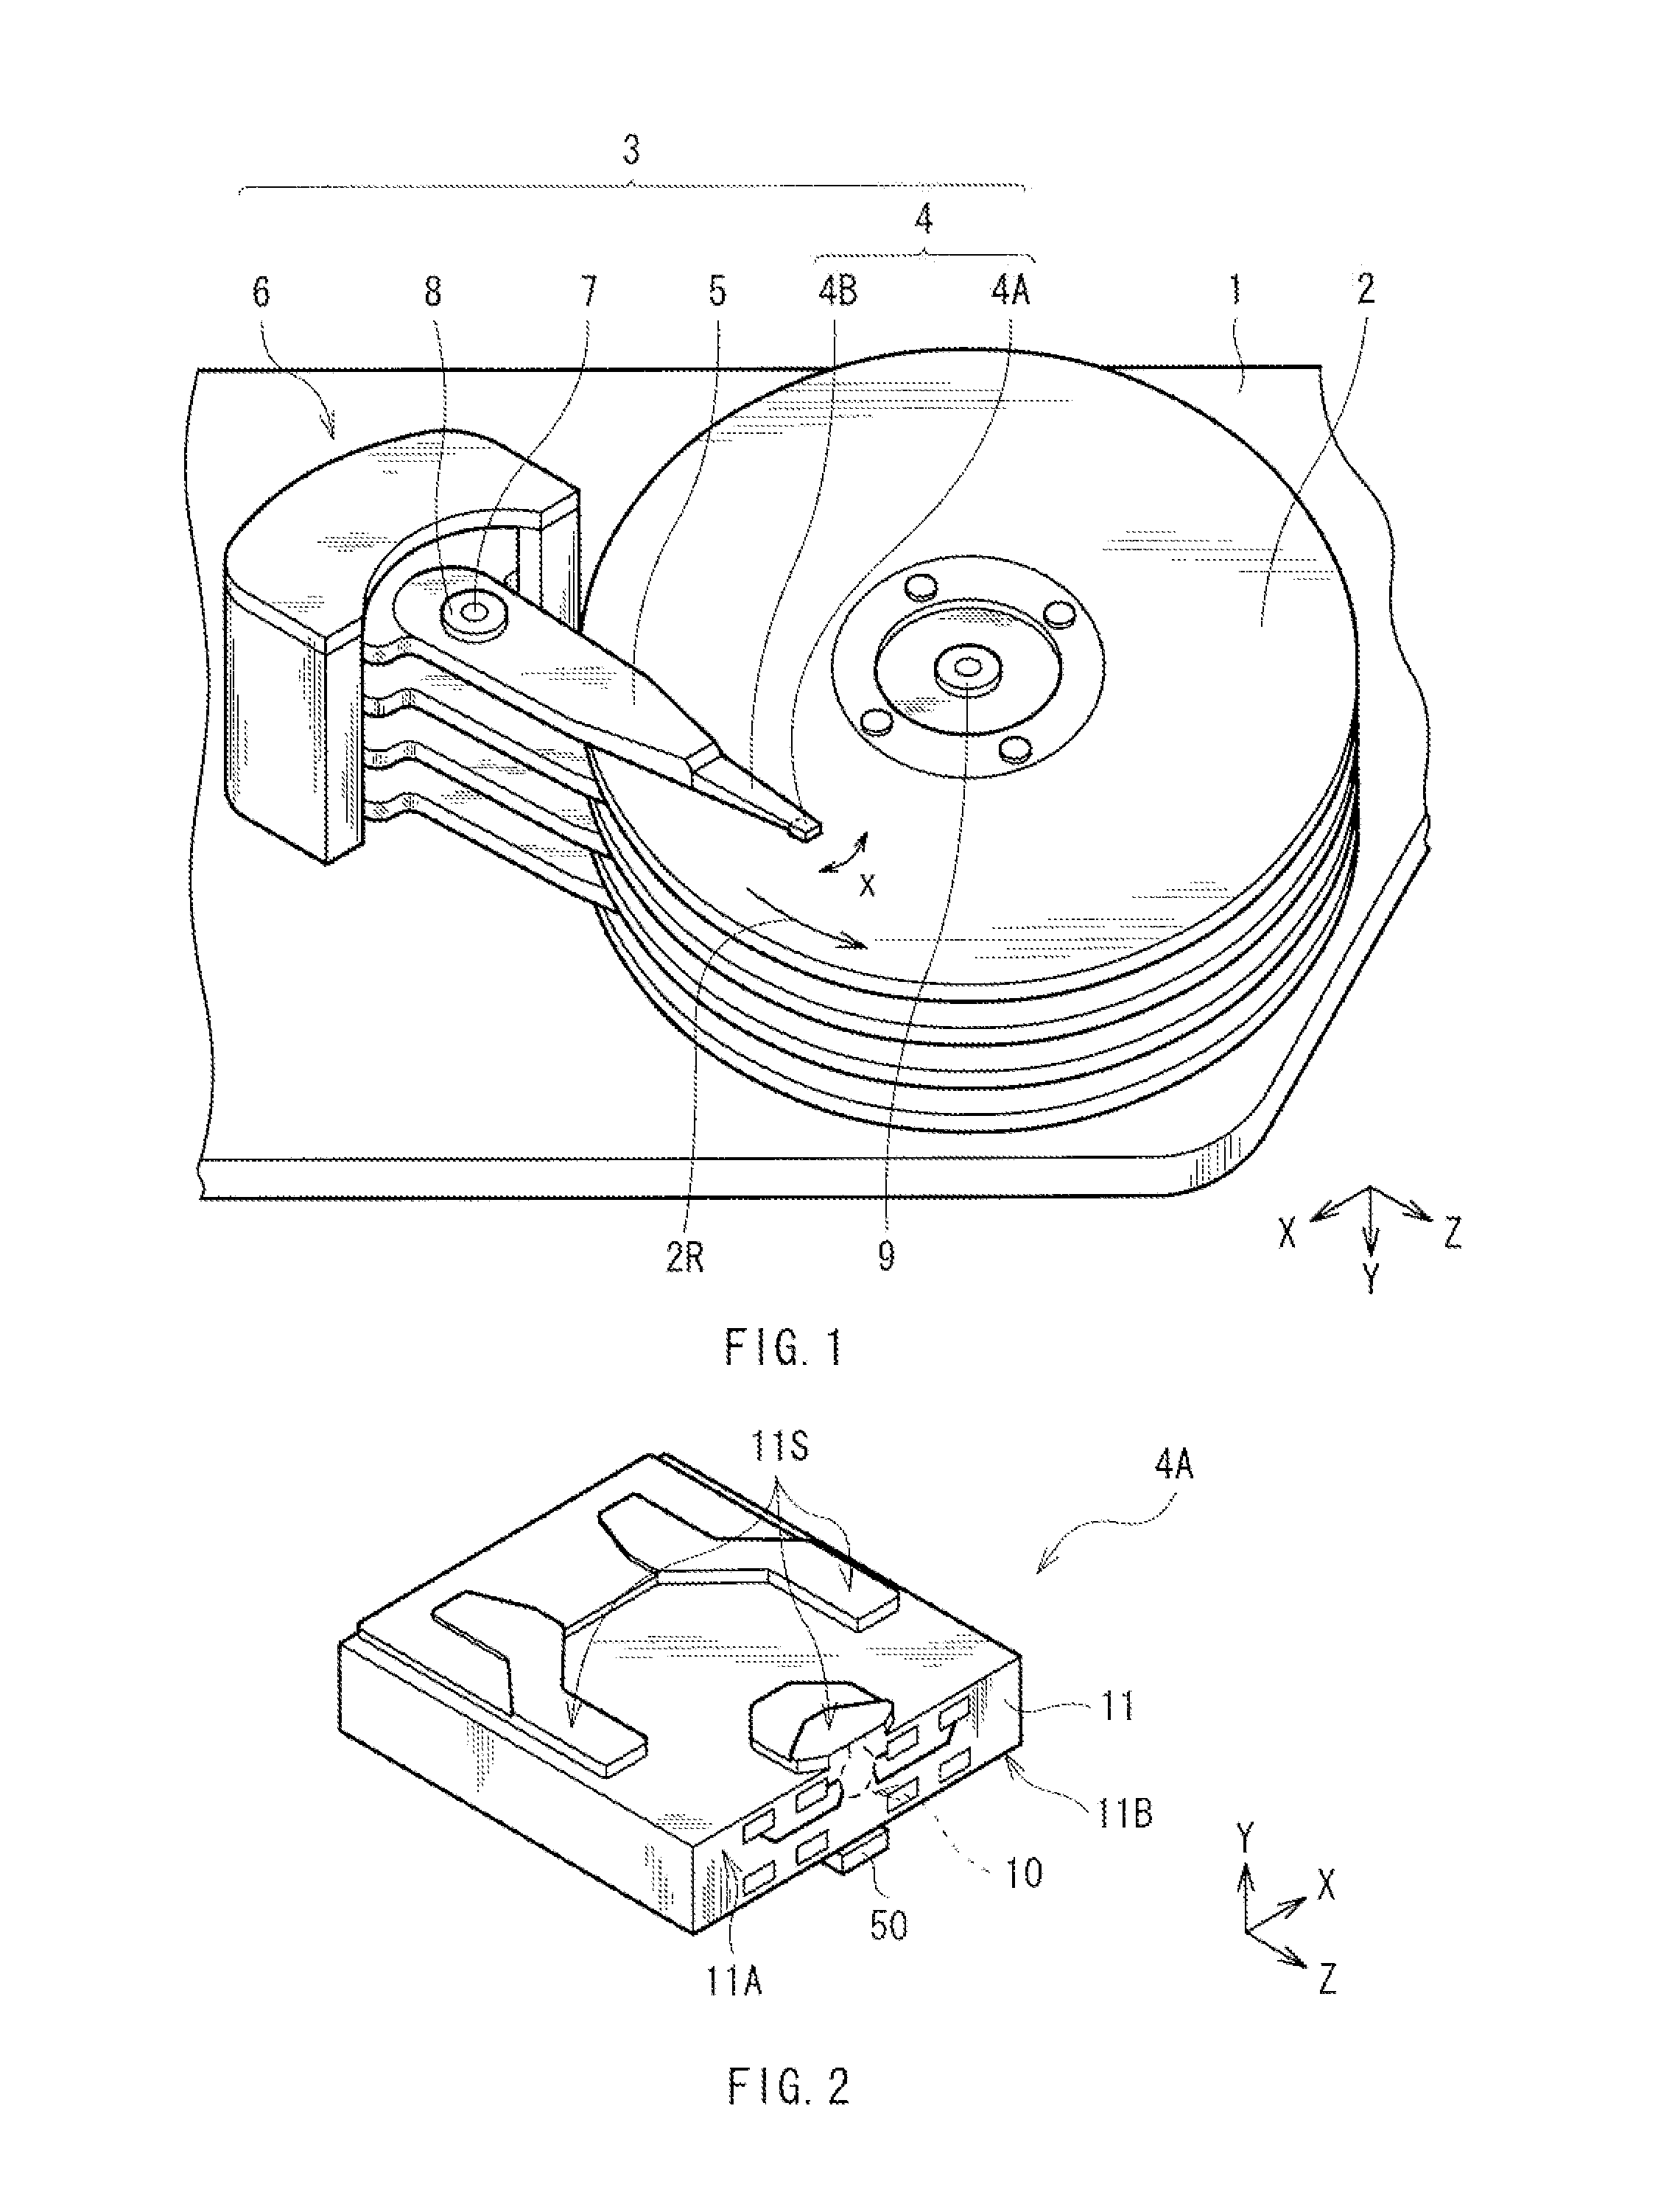 Thermally-assisted magnetic recording head including first and second cladding sections having different characteristics